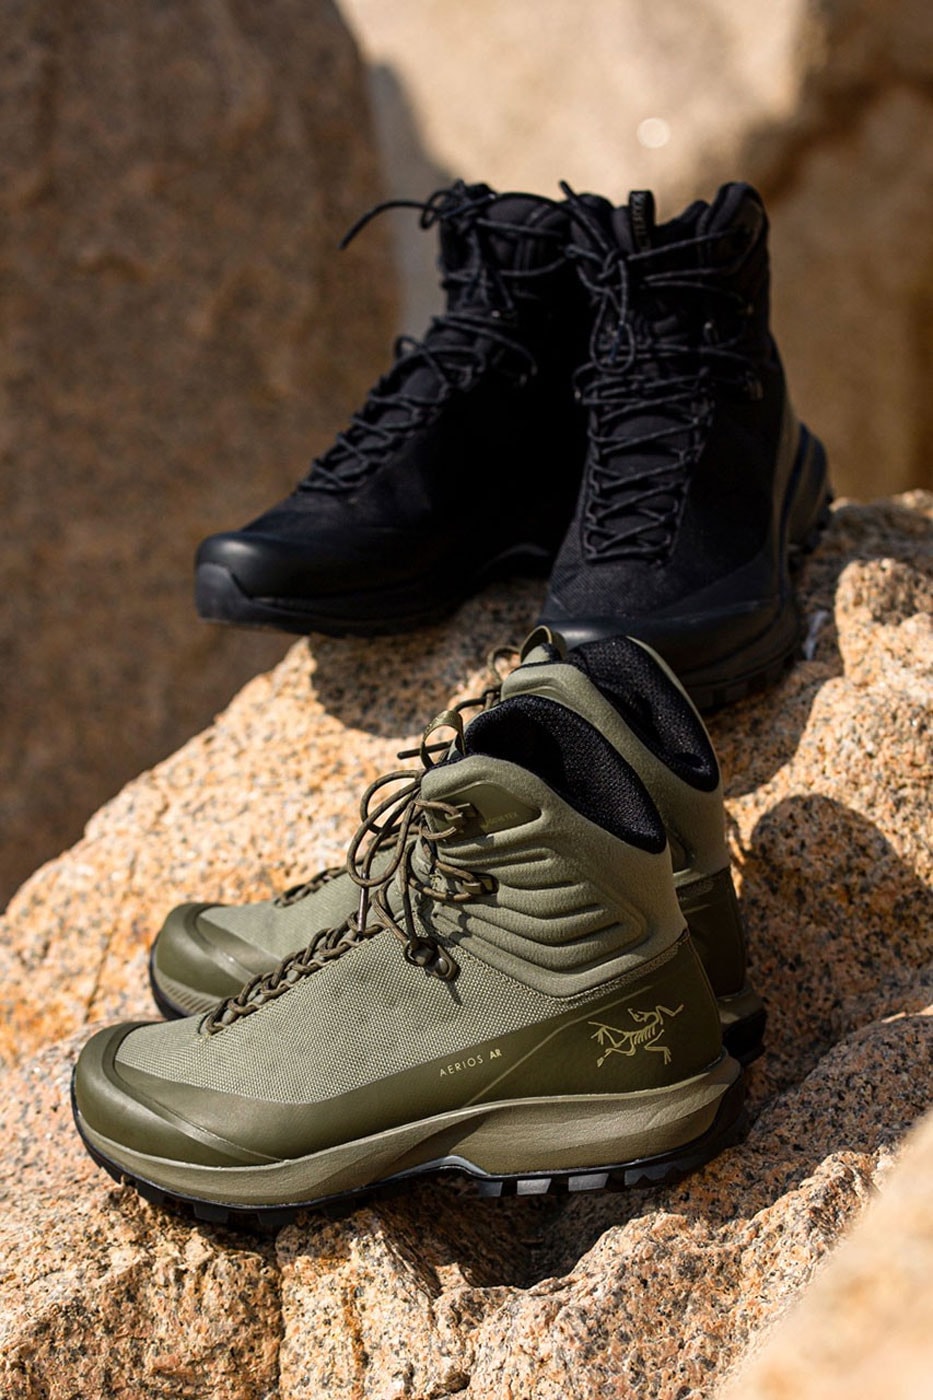 BEAMS to Release Arc'teryx Aerios AR MID Hiking Boots | Hypebeast